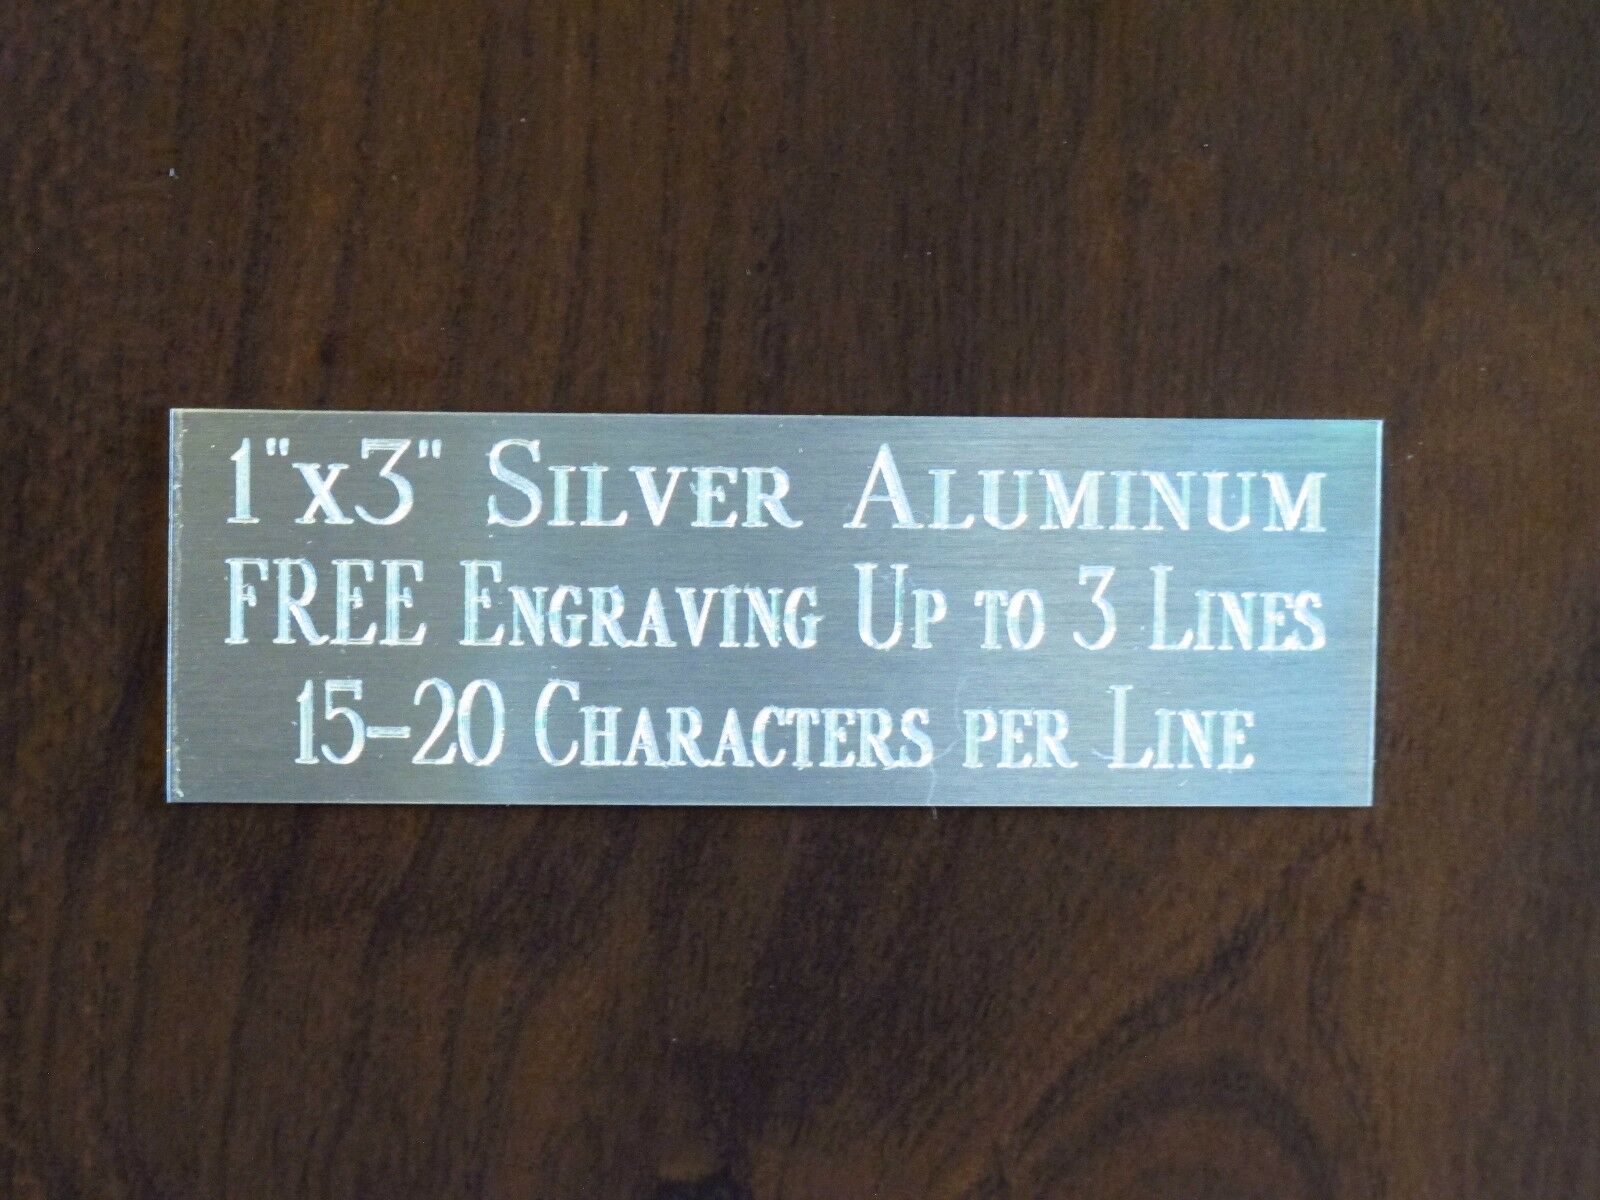 1"x3" Silver Name Plate Art-trophies-gift-taxidermy-flag Case Free Engraved